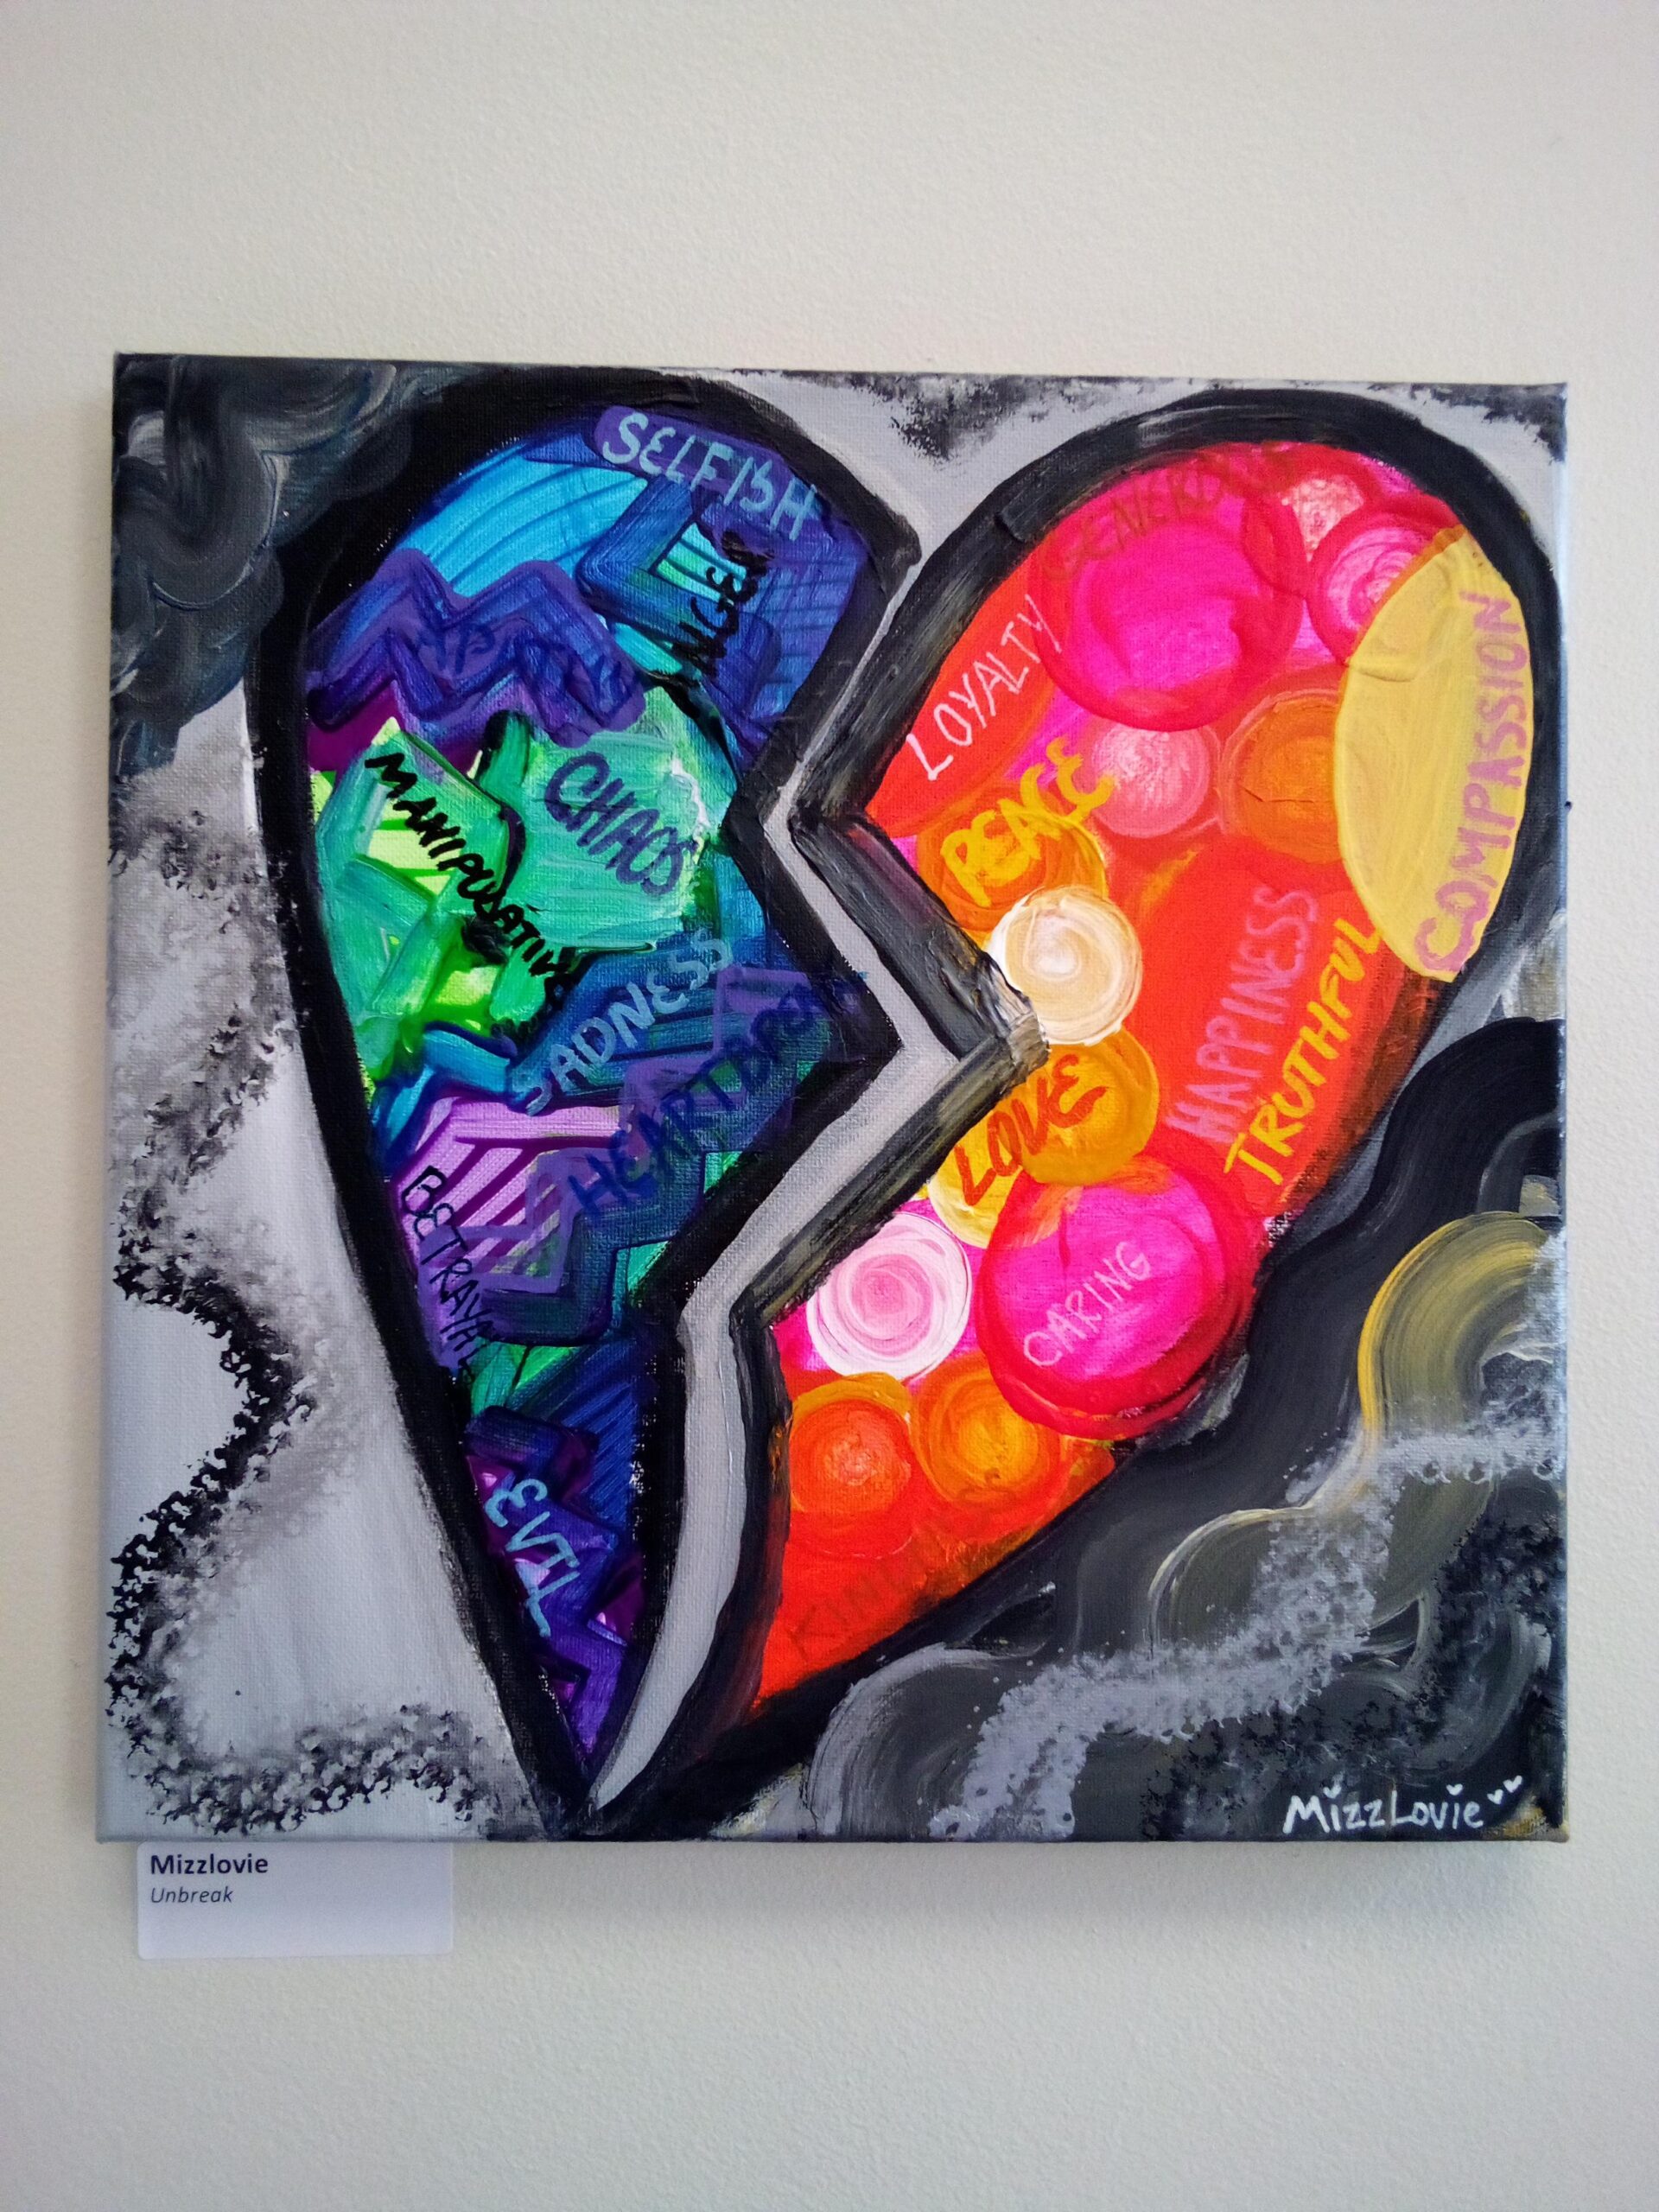 [Artist: Mizzlovie   Title: Unbreak]
This piece represents how abuse & negativity affects the heart and how positive things can help the heart to heal. Each side of the heart represents the different emotions that either bring heartbreak or help to bring happiness to our lives.